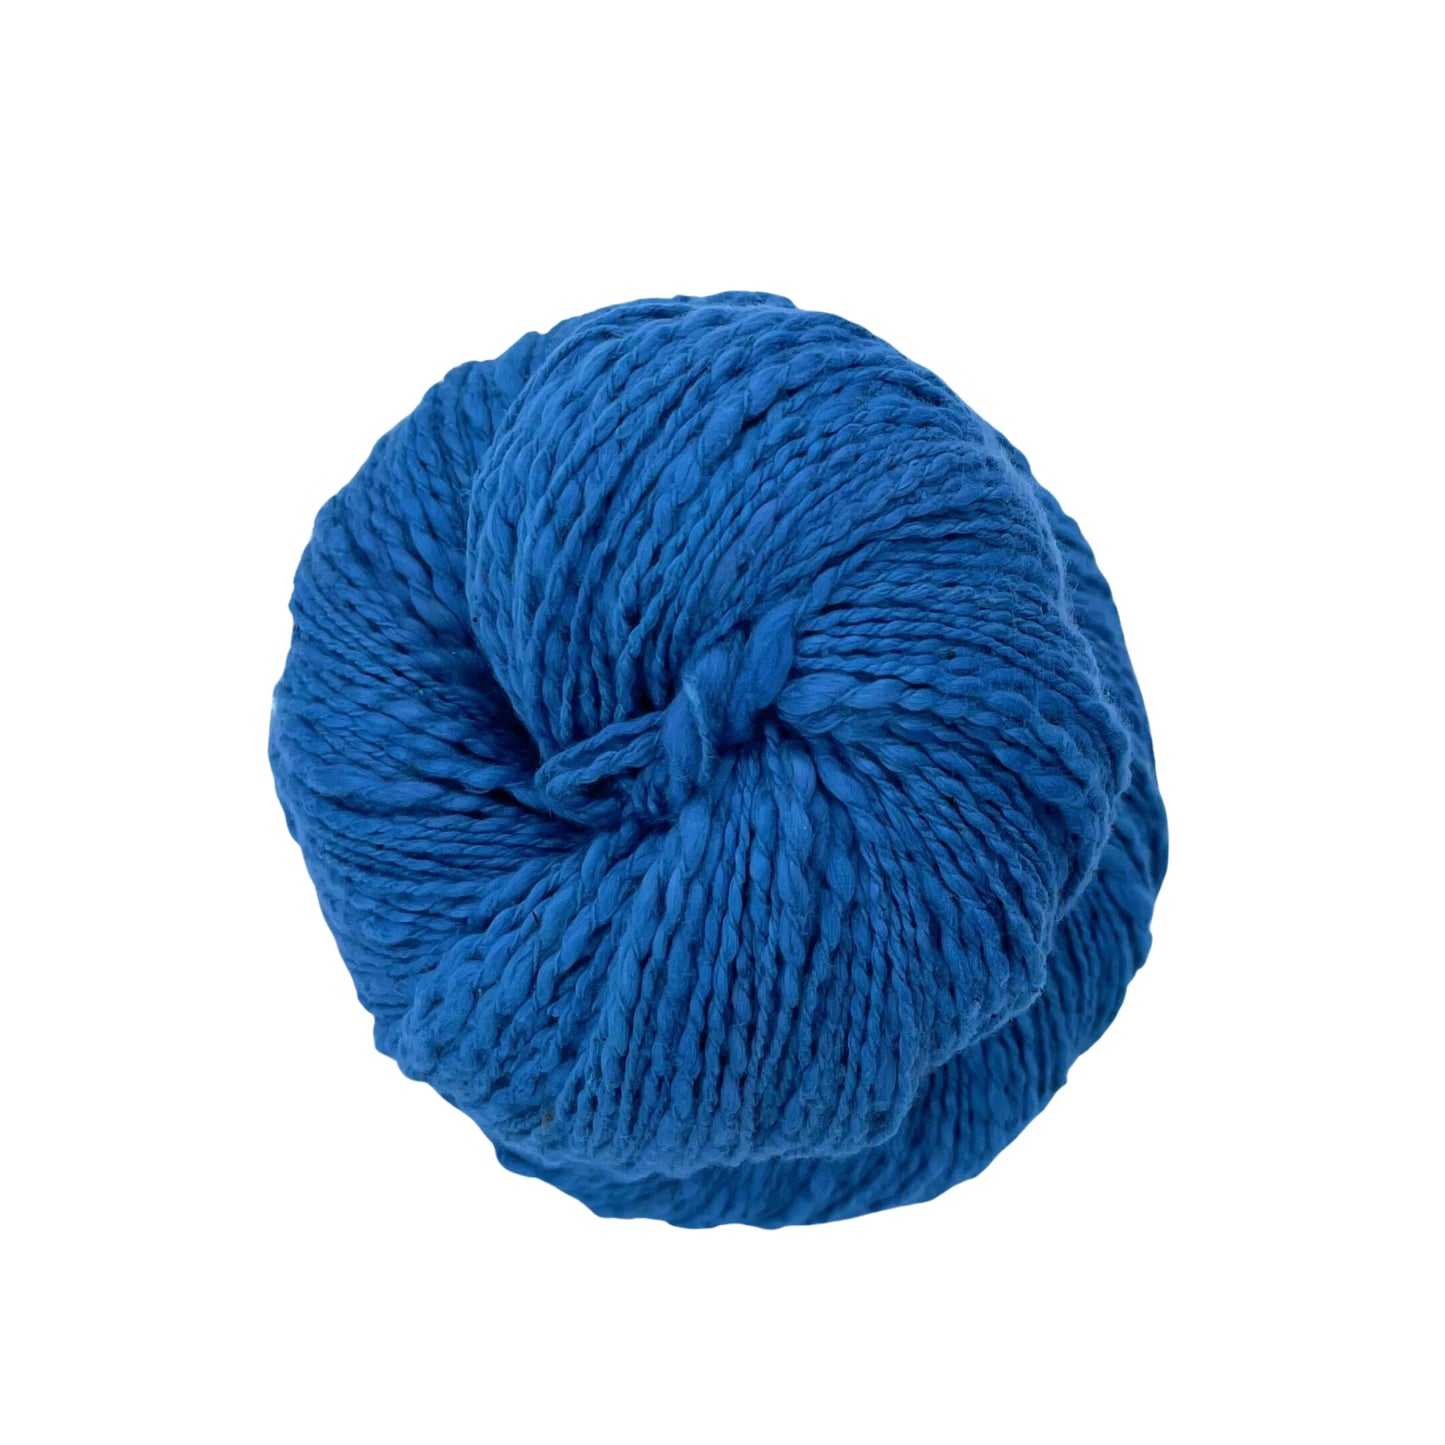 A skein of blue cotton yarn on a white background